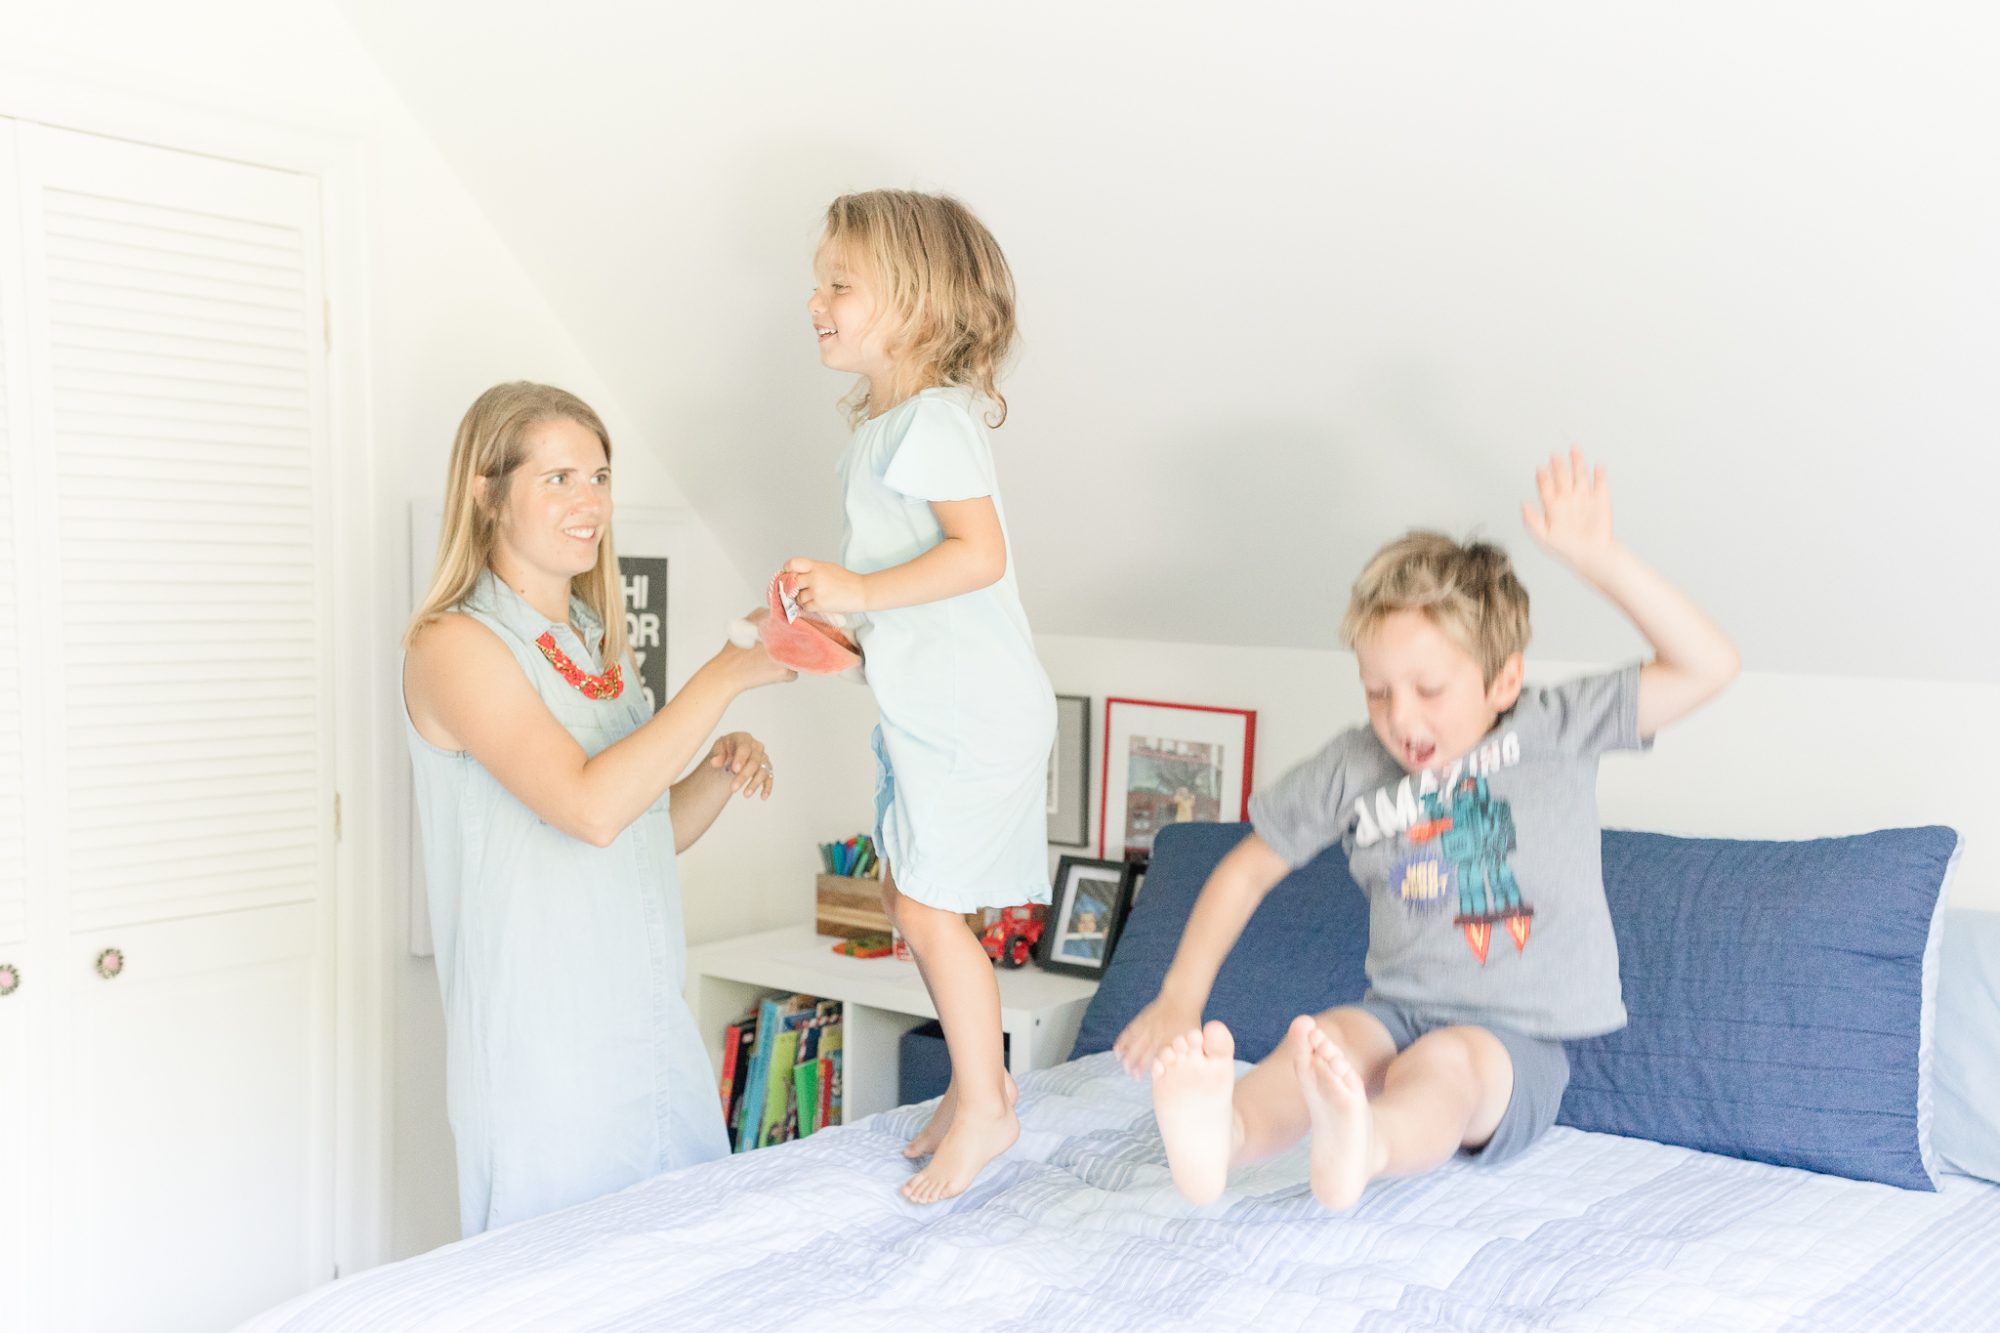 Rose. Thorn. Bud – Building Connections With Your Kids